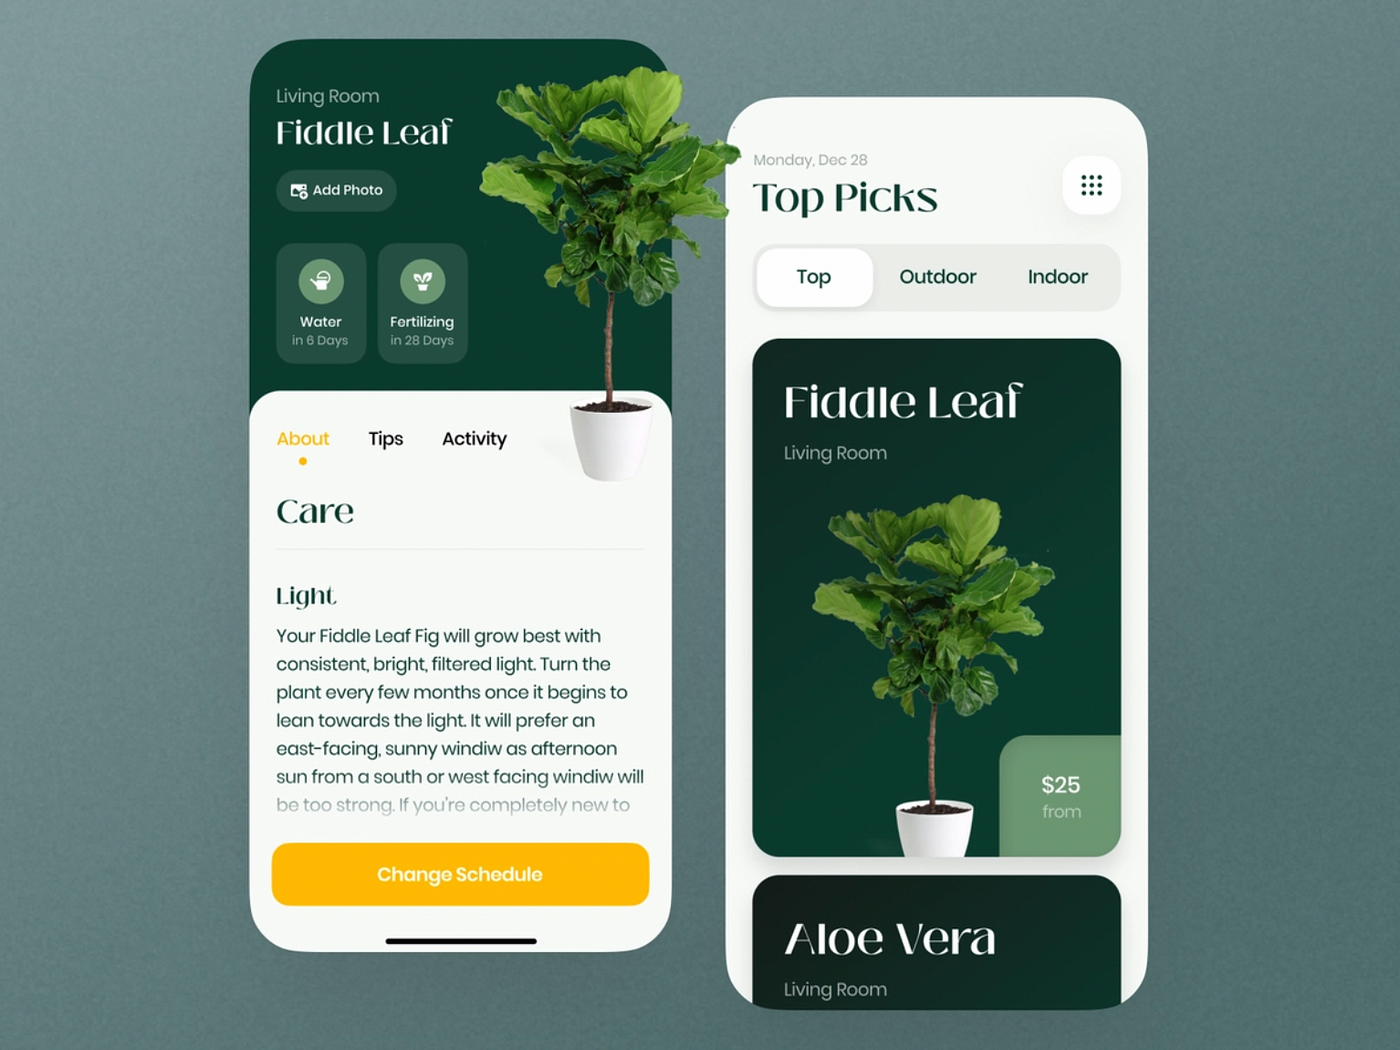 Fiddle leaf product page.